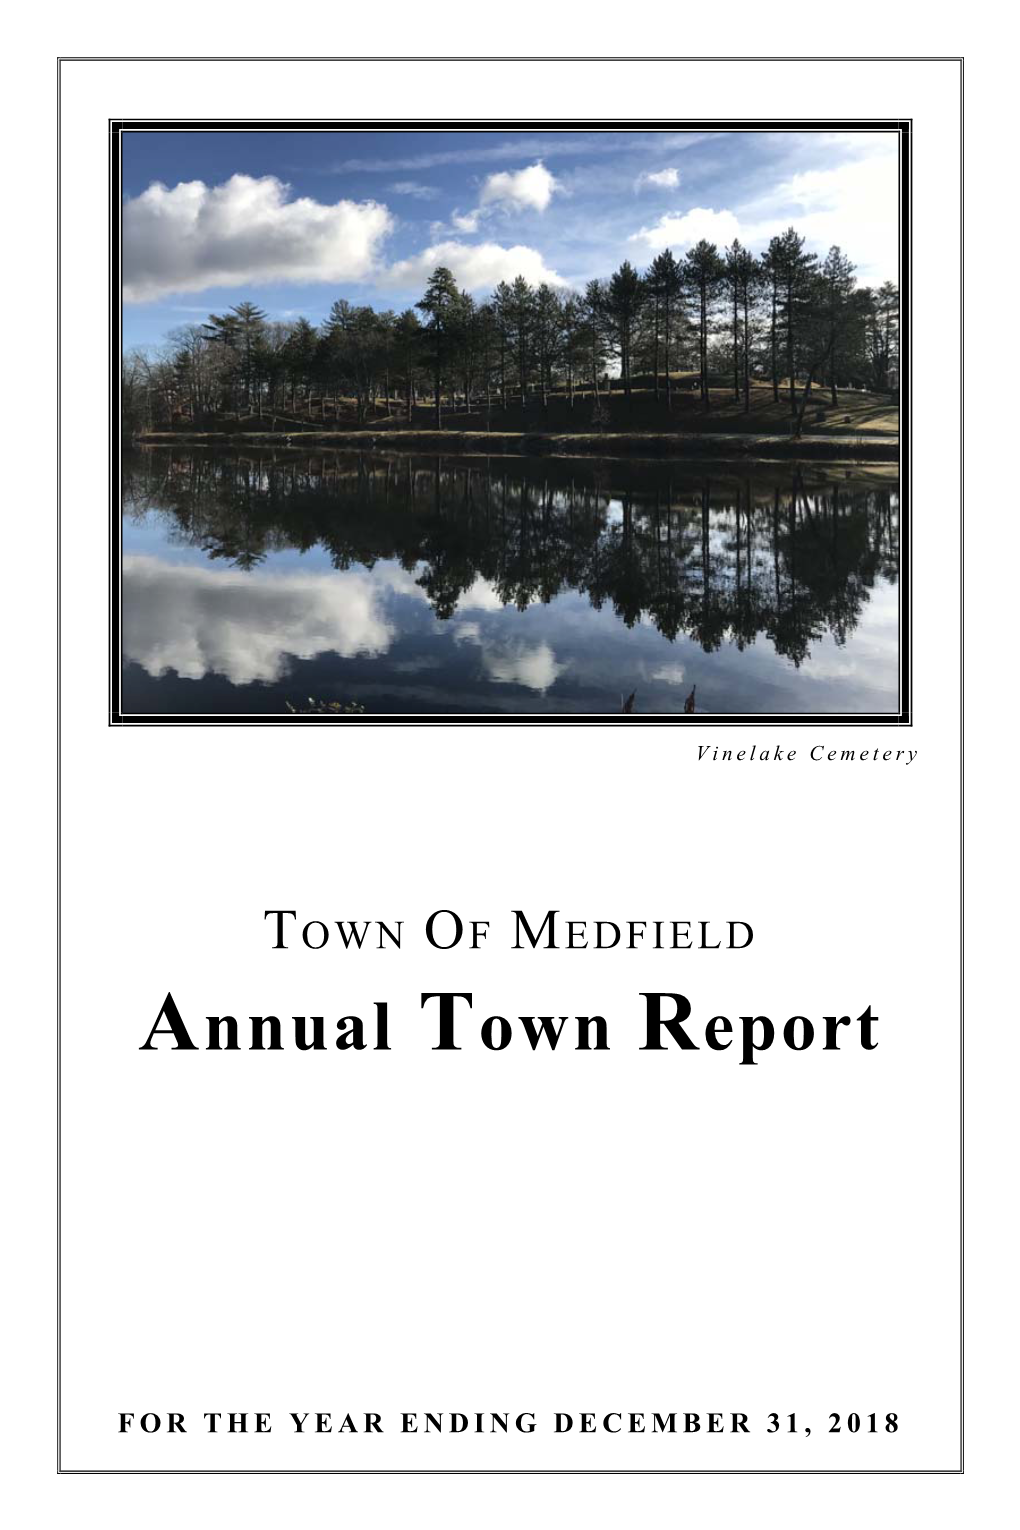 2018 Annual Town Report